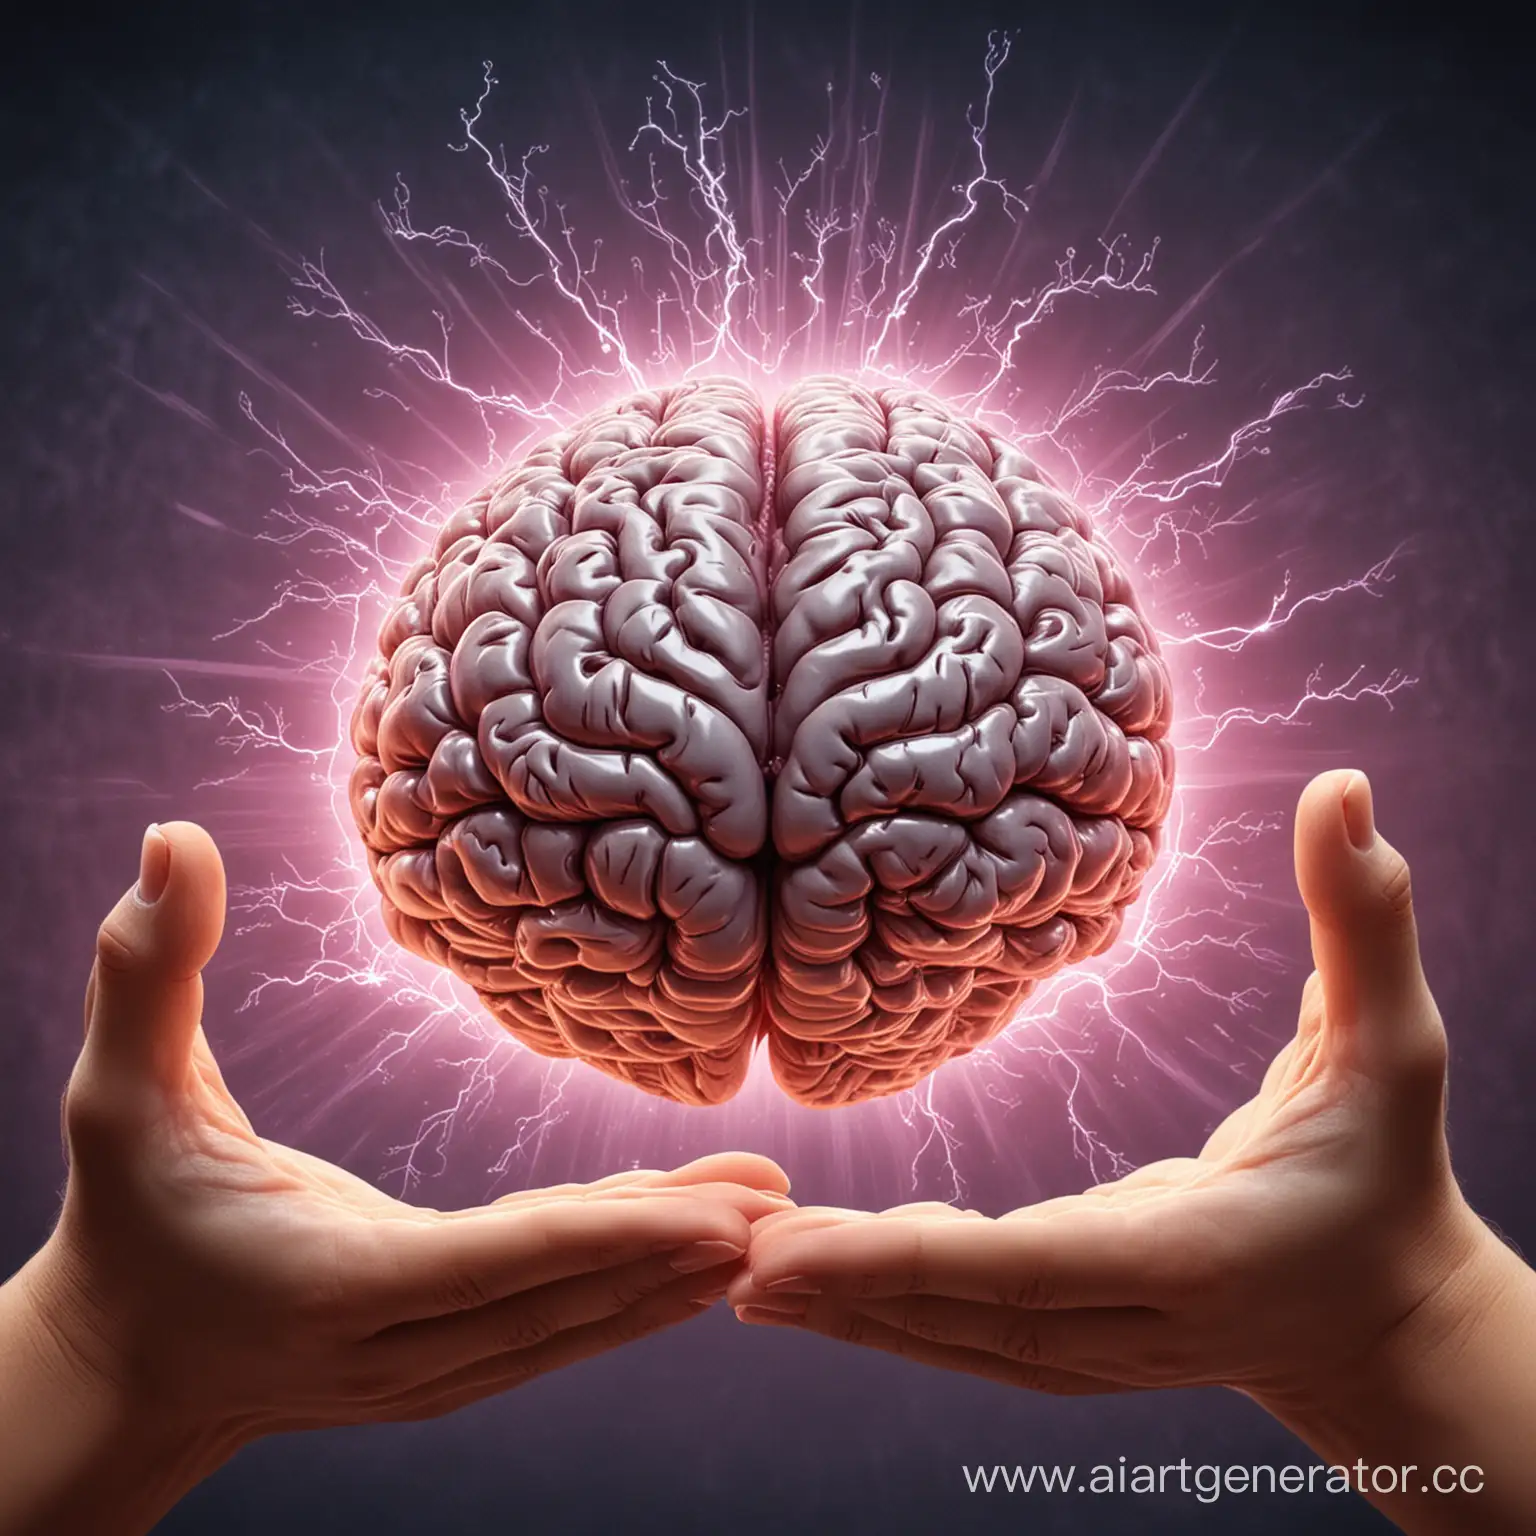 Magical-Brain-in-Hands-Conceptual-Art-of-Power-and-Imagination